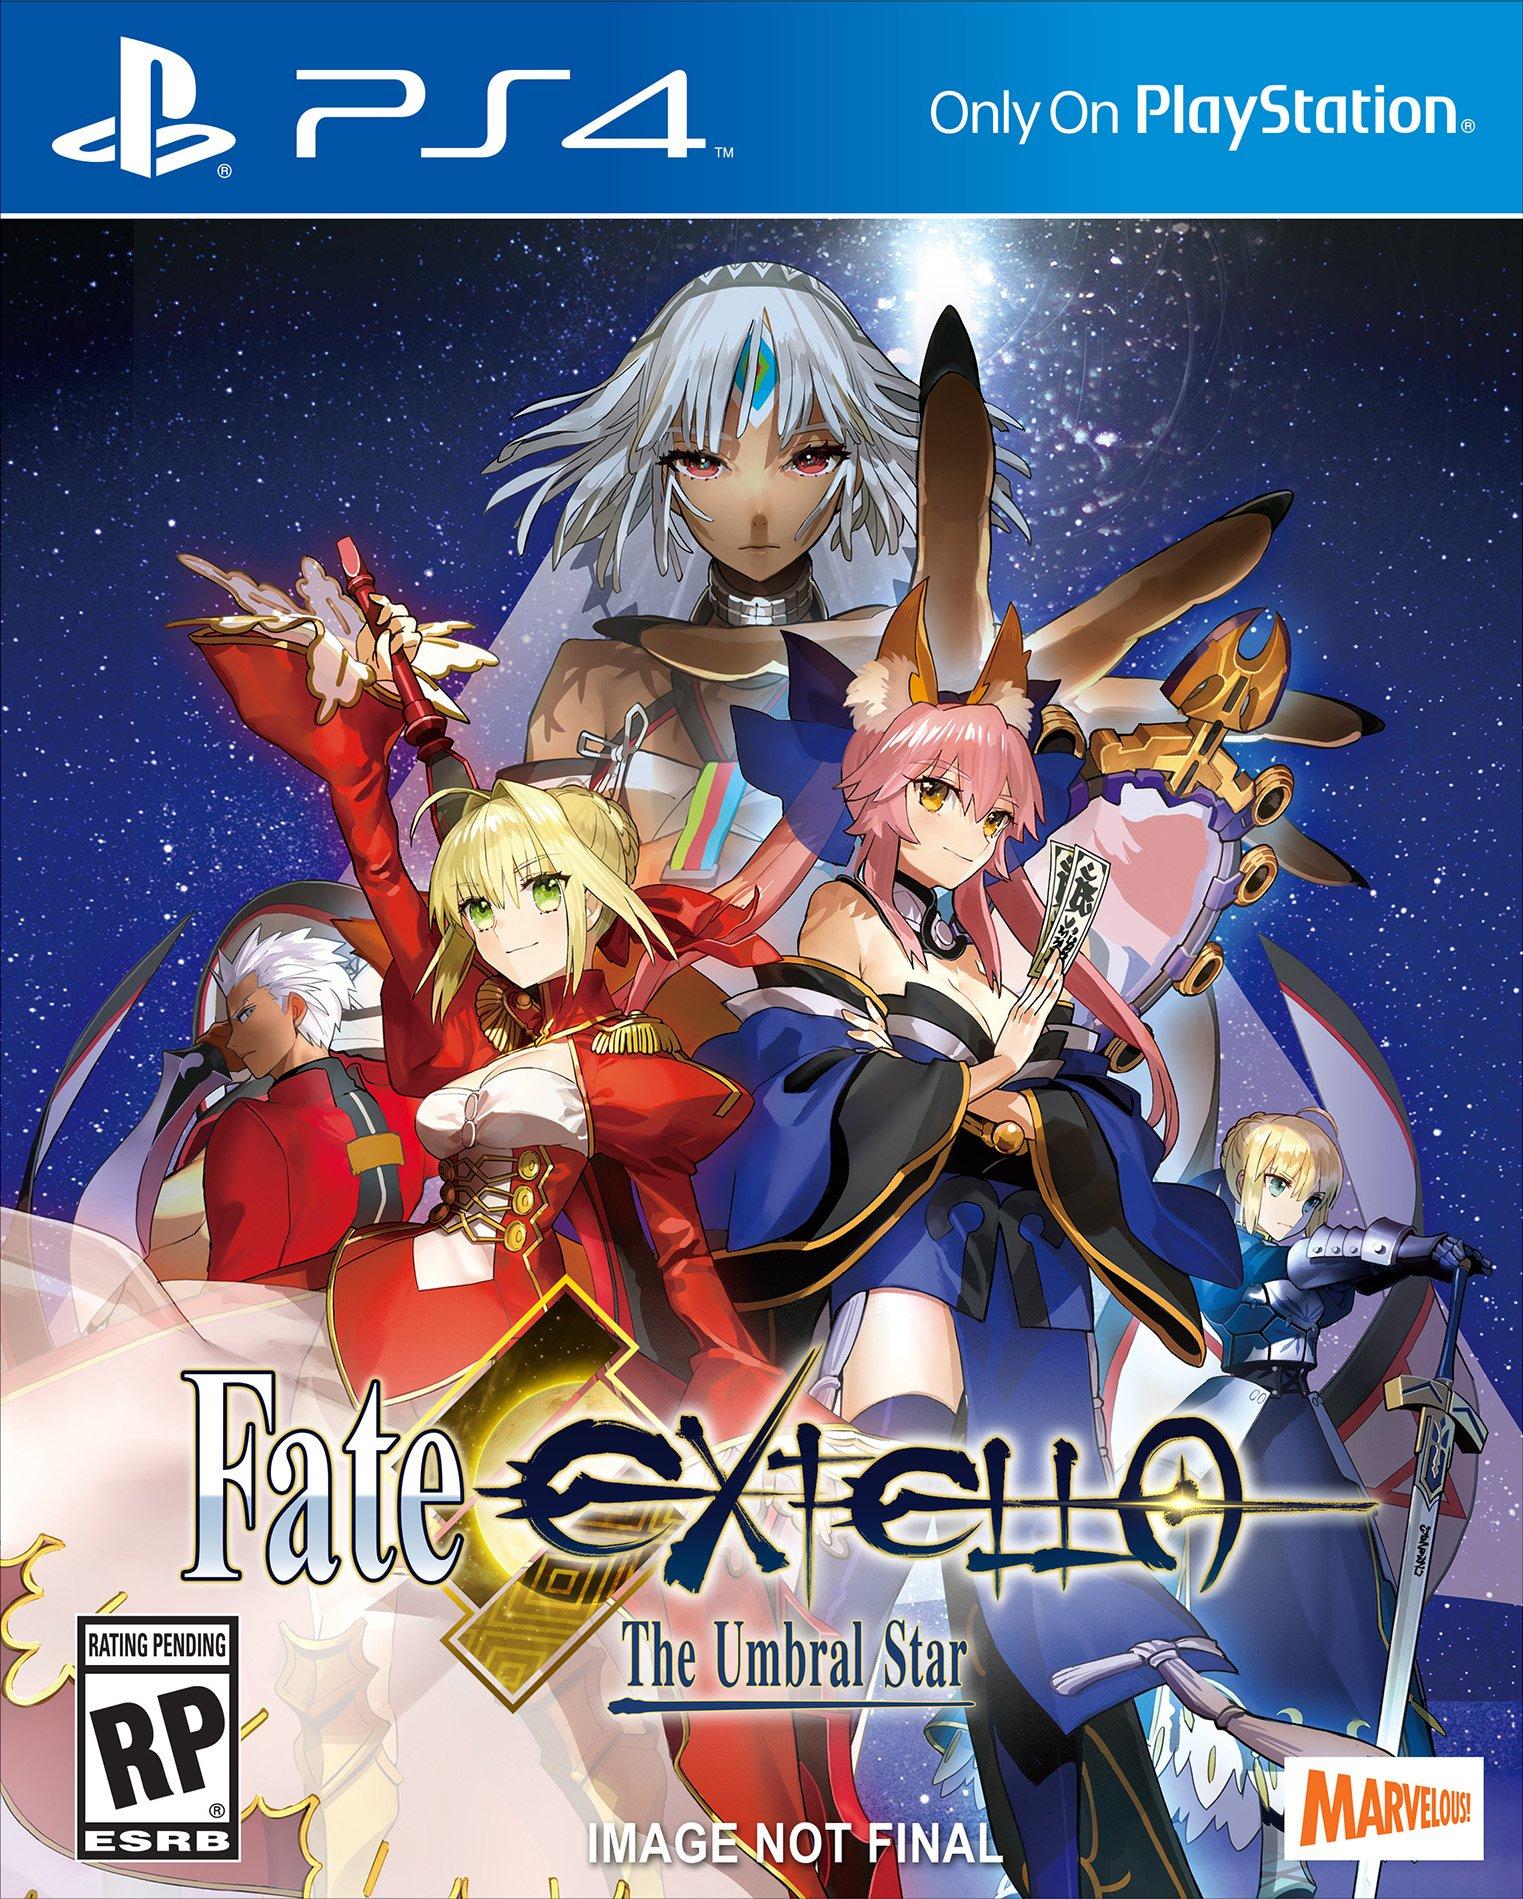 Fate/EXTELLA: The Umbral Star - PlayStation 4 | XSEED Games 